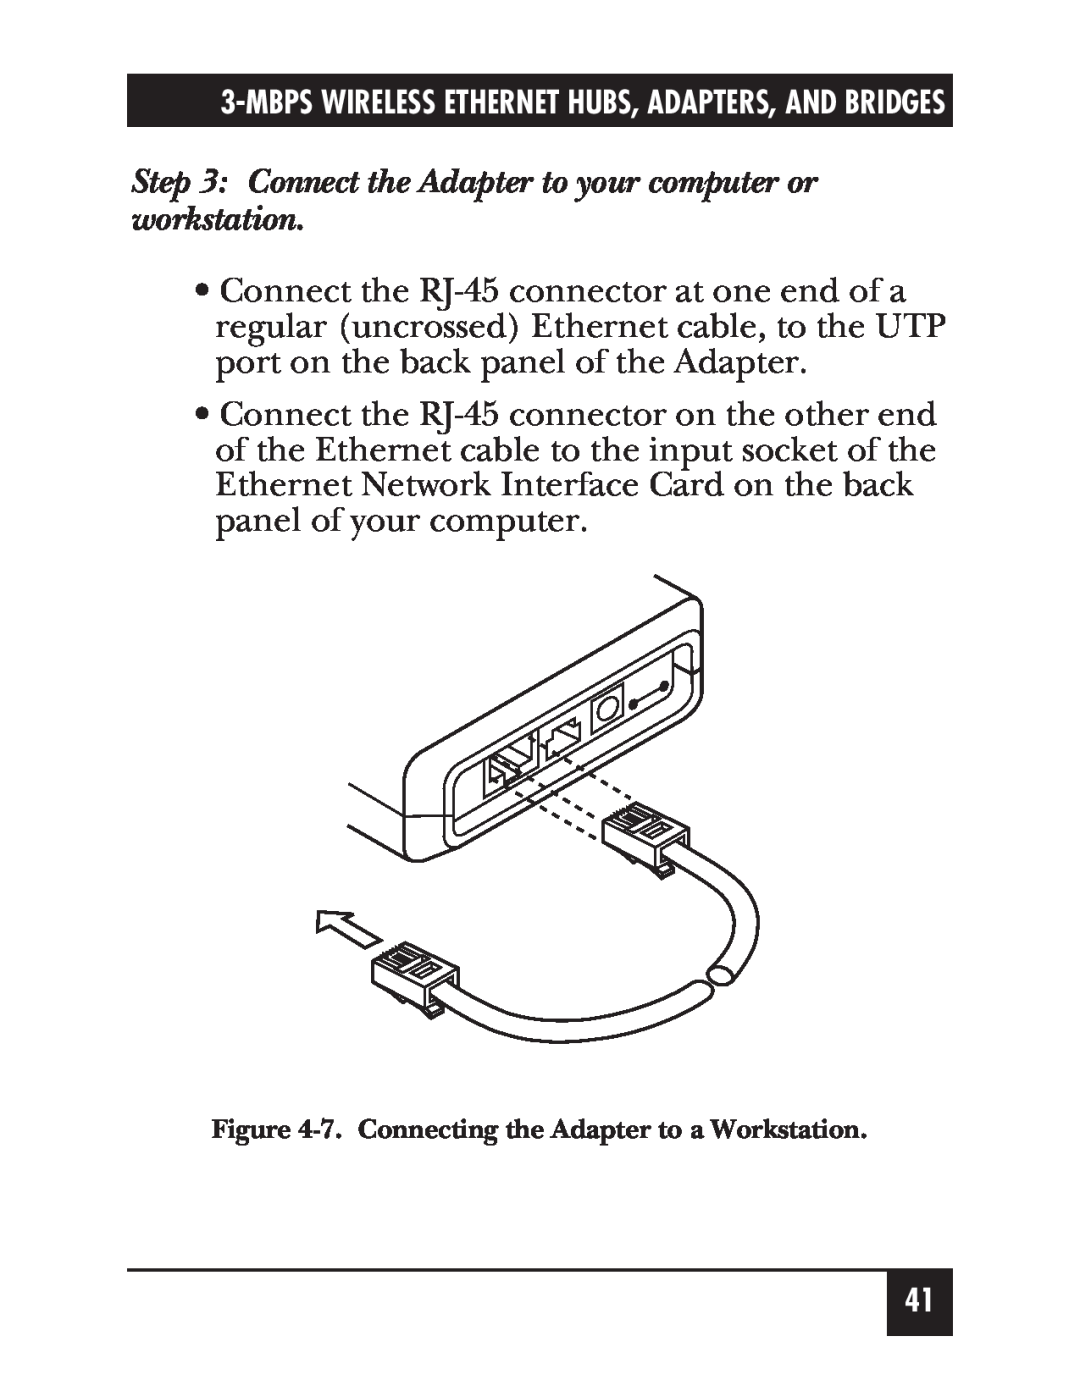 Black Box LW008A, LW012A Connect the Adapter to your computer or workstation, 7. Connecting the Adapter to a Workstation 